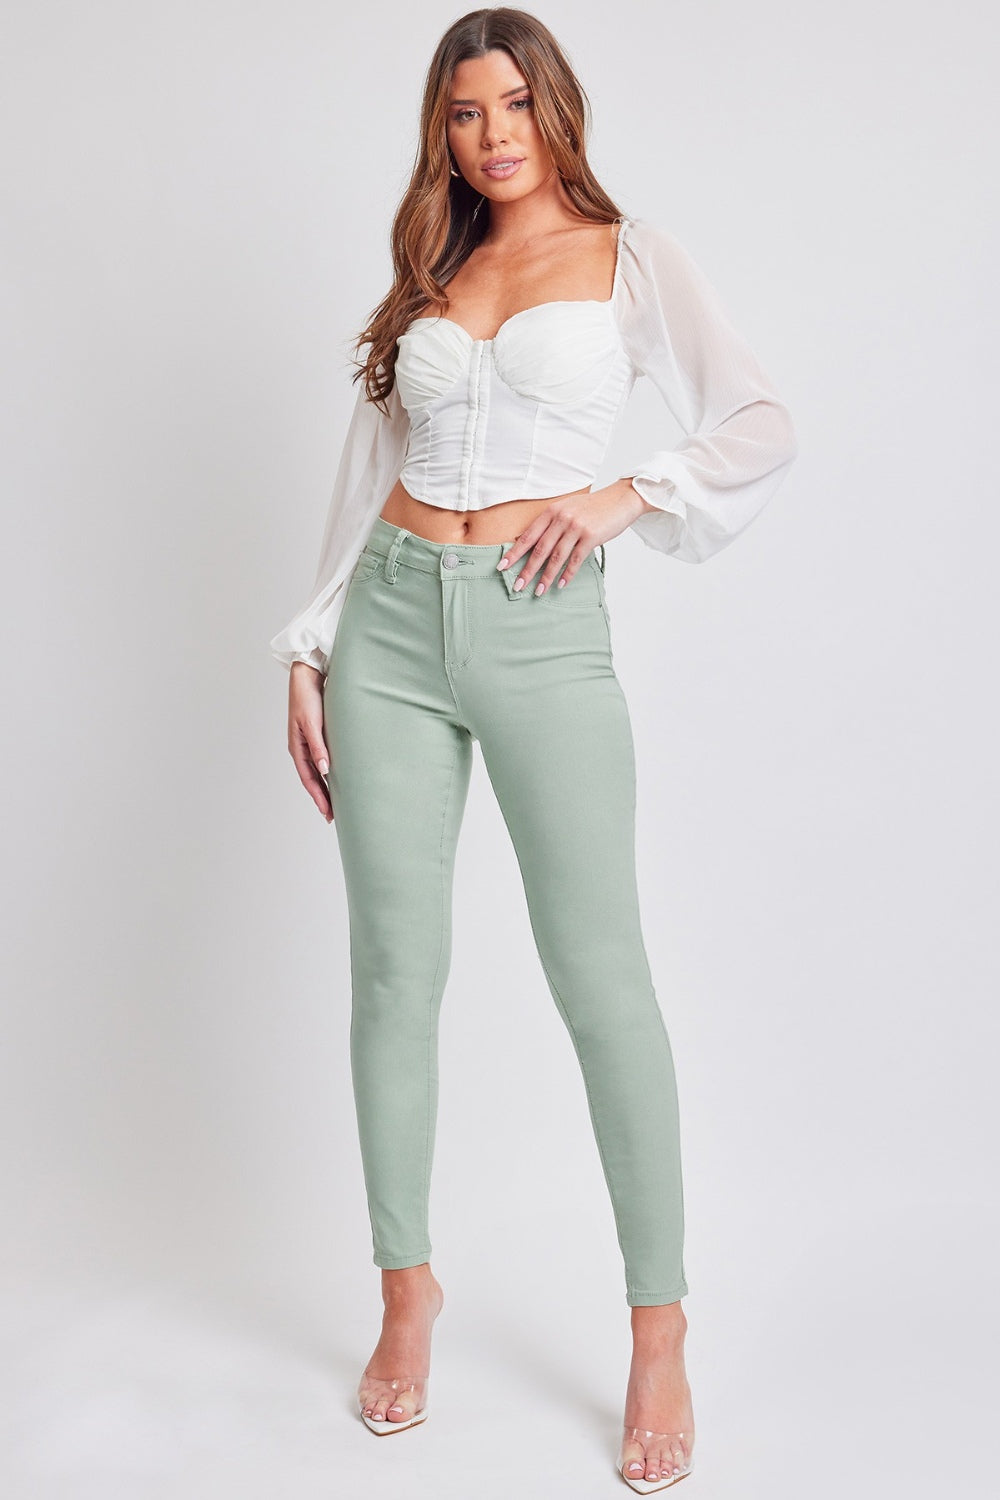 YMI Hyperstretch Mid-Rise Skinny Jeans in Jade